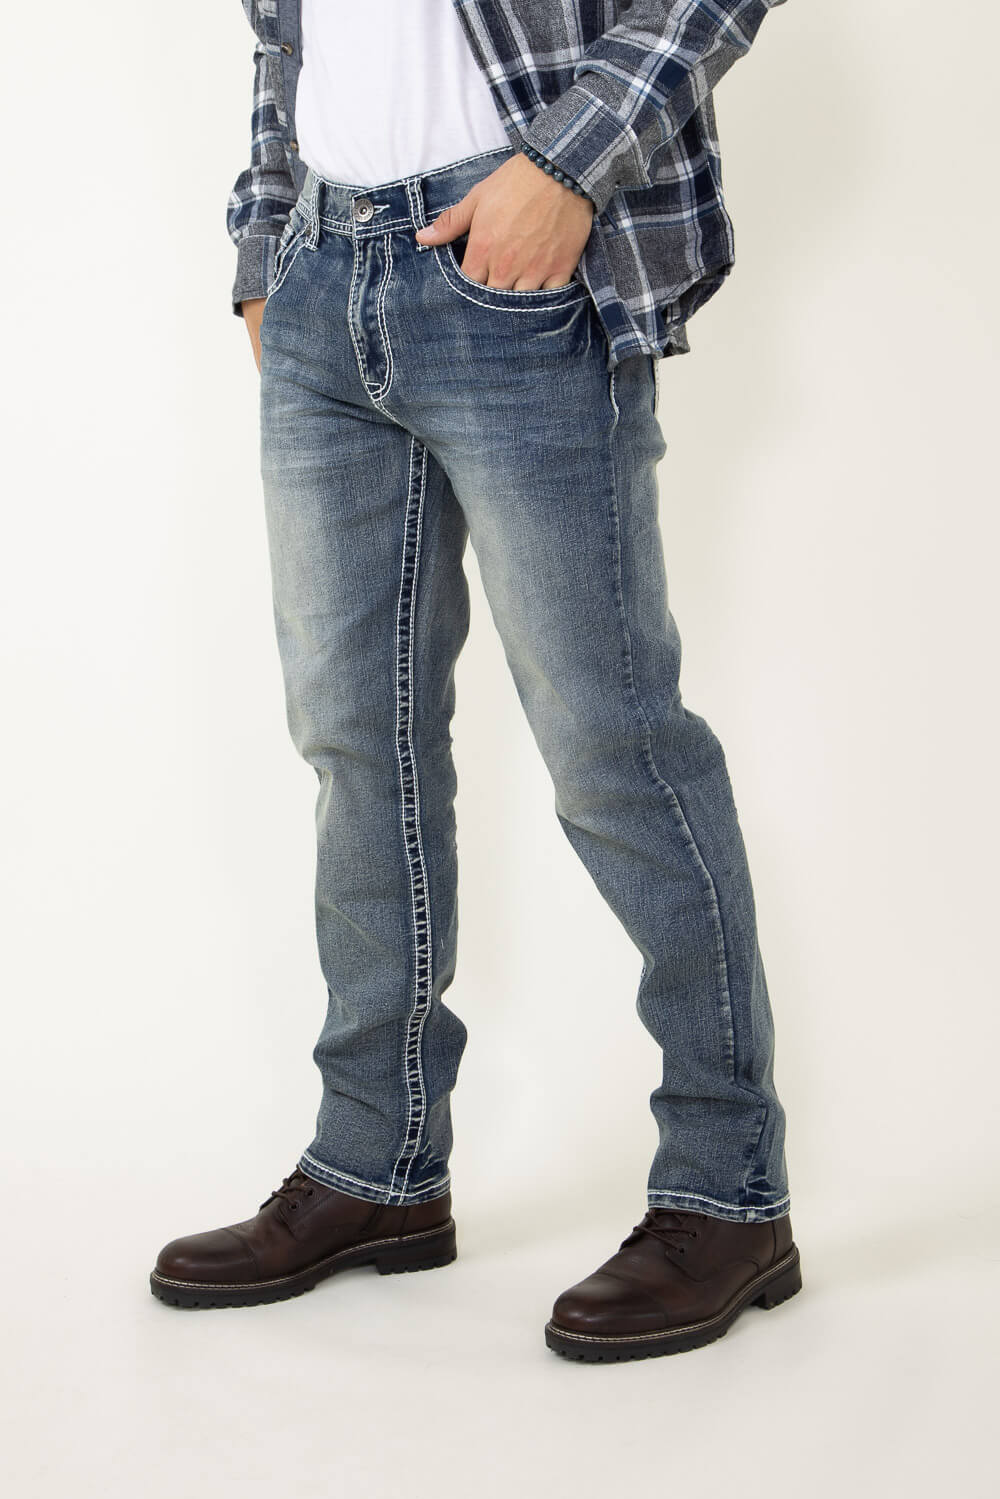 Aggregate 174+ jeans and boots men’s